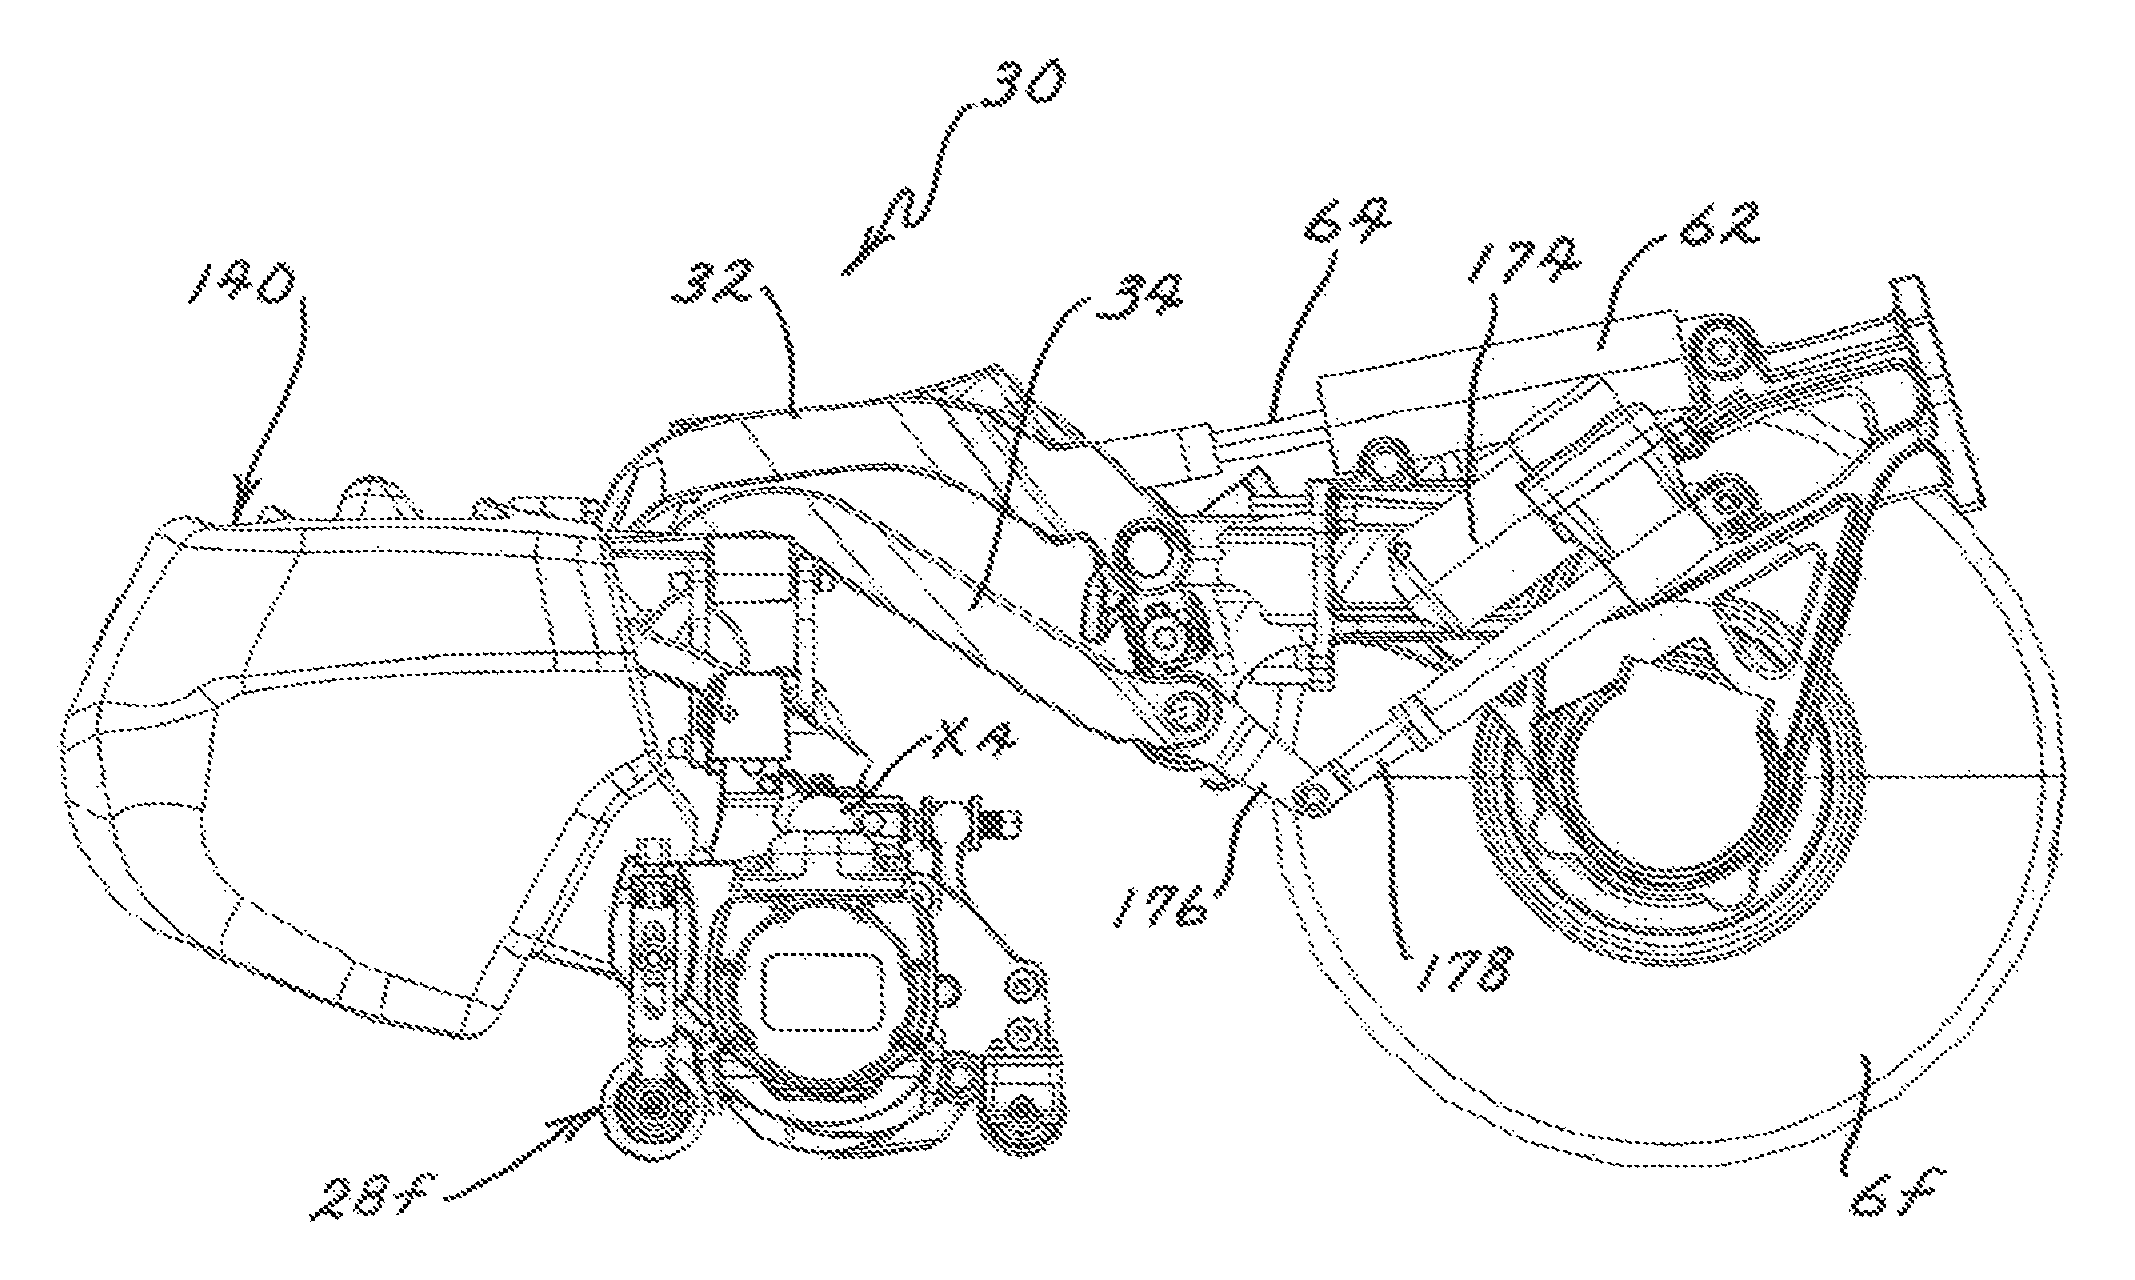 Reel mower with cutting units suspended by double A arm suspensions